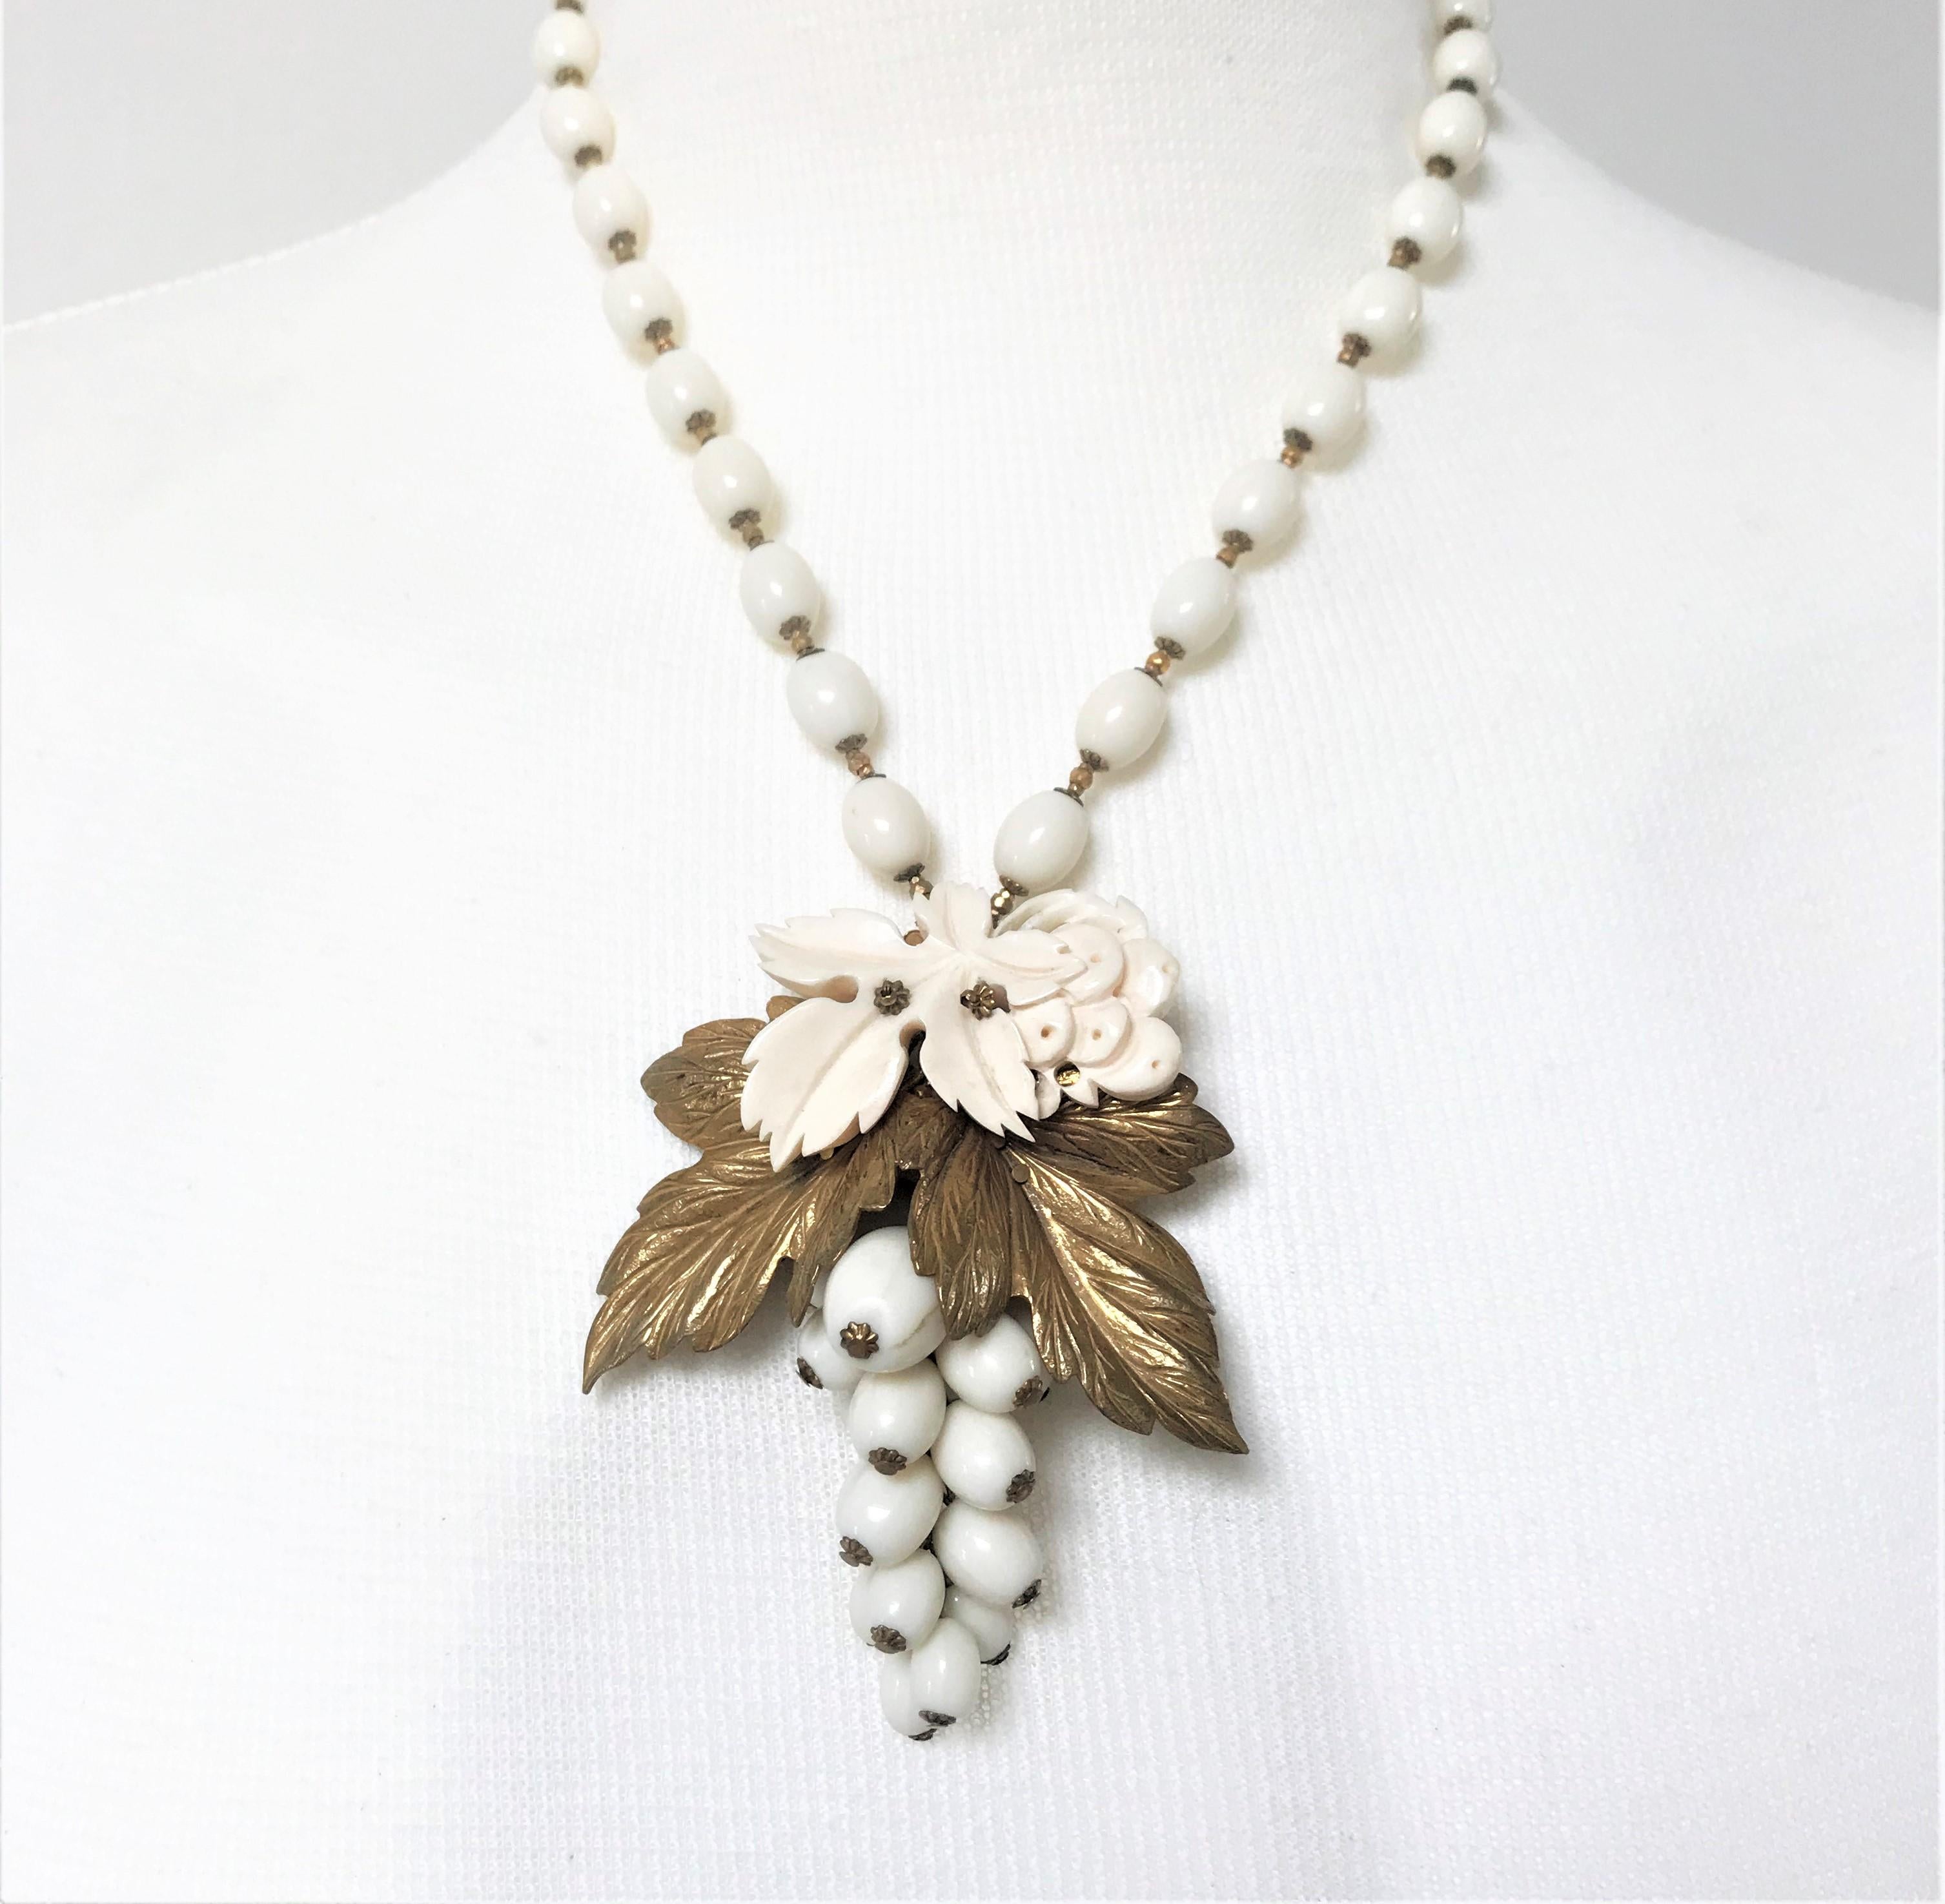 A very nice set by Miriam Haskell necklace and ear clips from the 50s USA. It consists of a chain with ivory colored 1 cm glass beads. A grape hanging from the same pearls as the necklace, 2 gilded vine leaves and smaller leaves carved over them. In